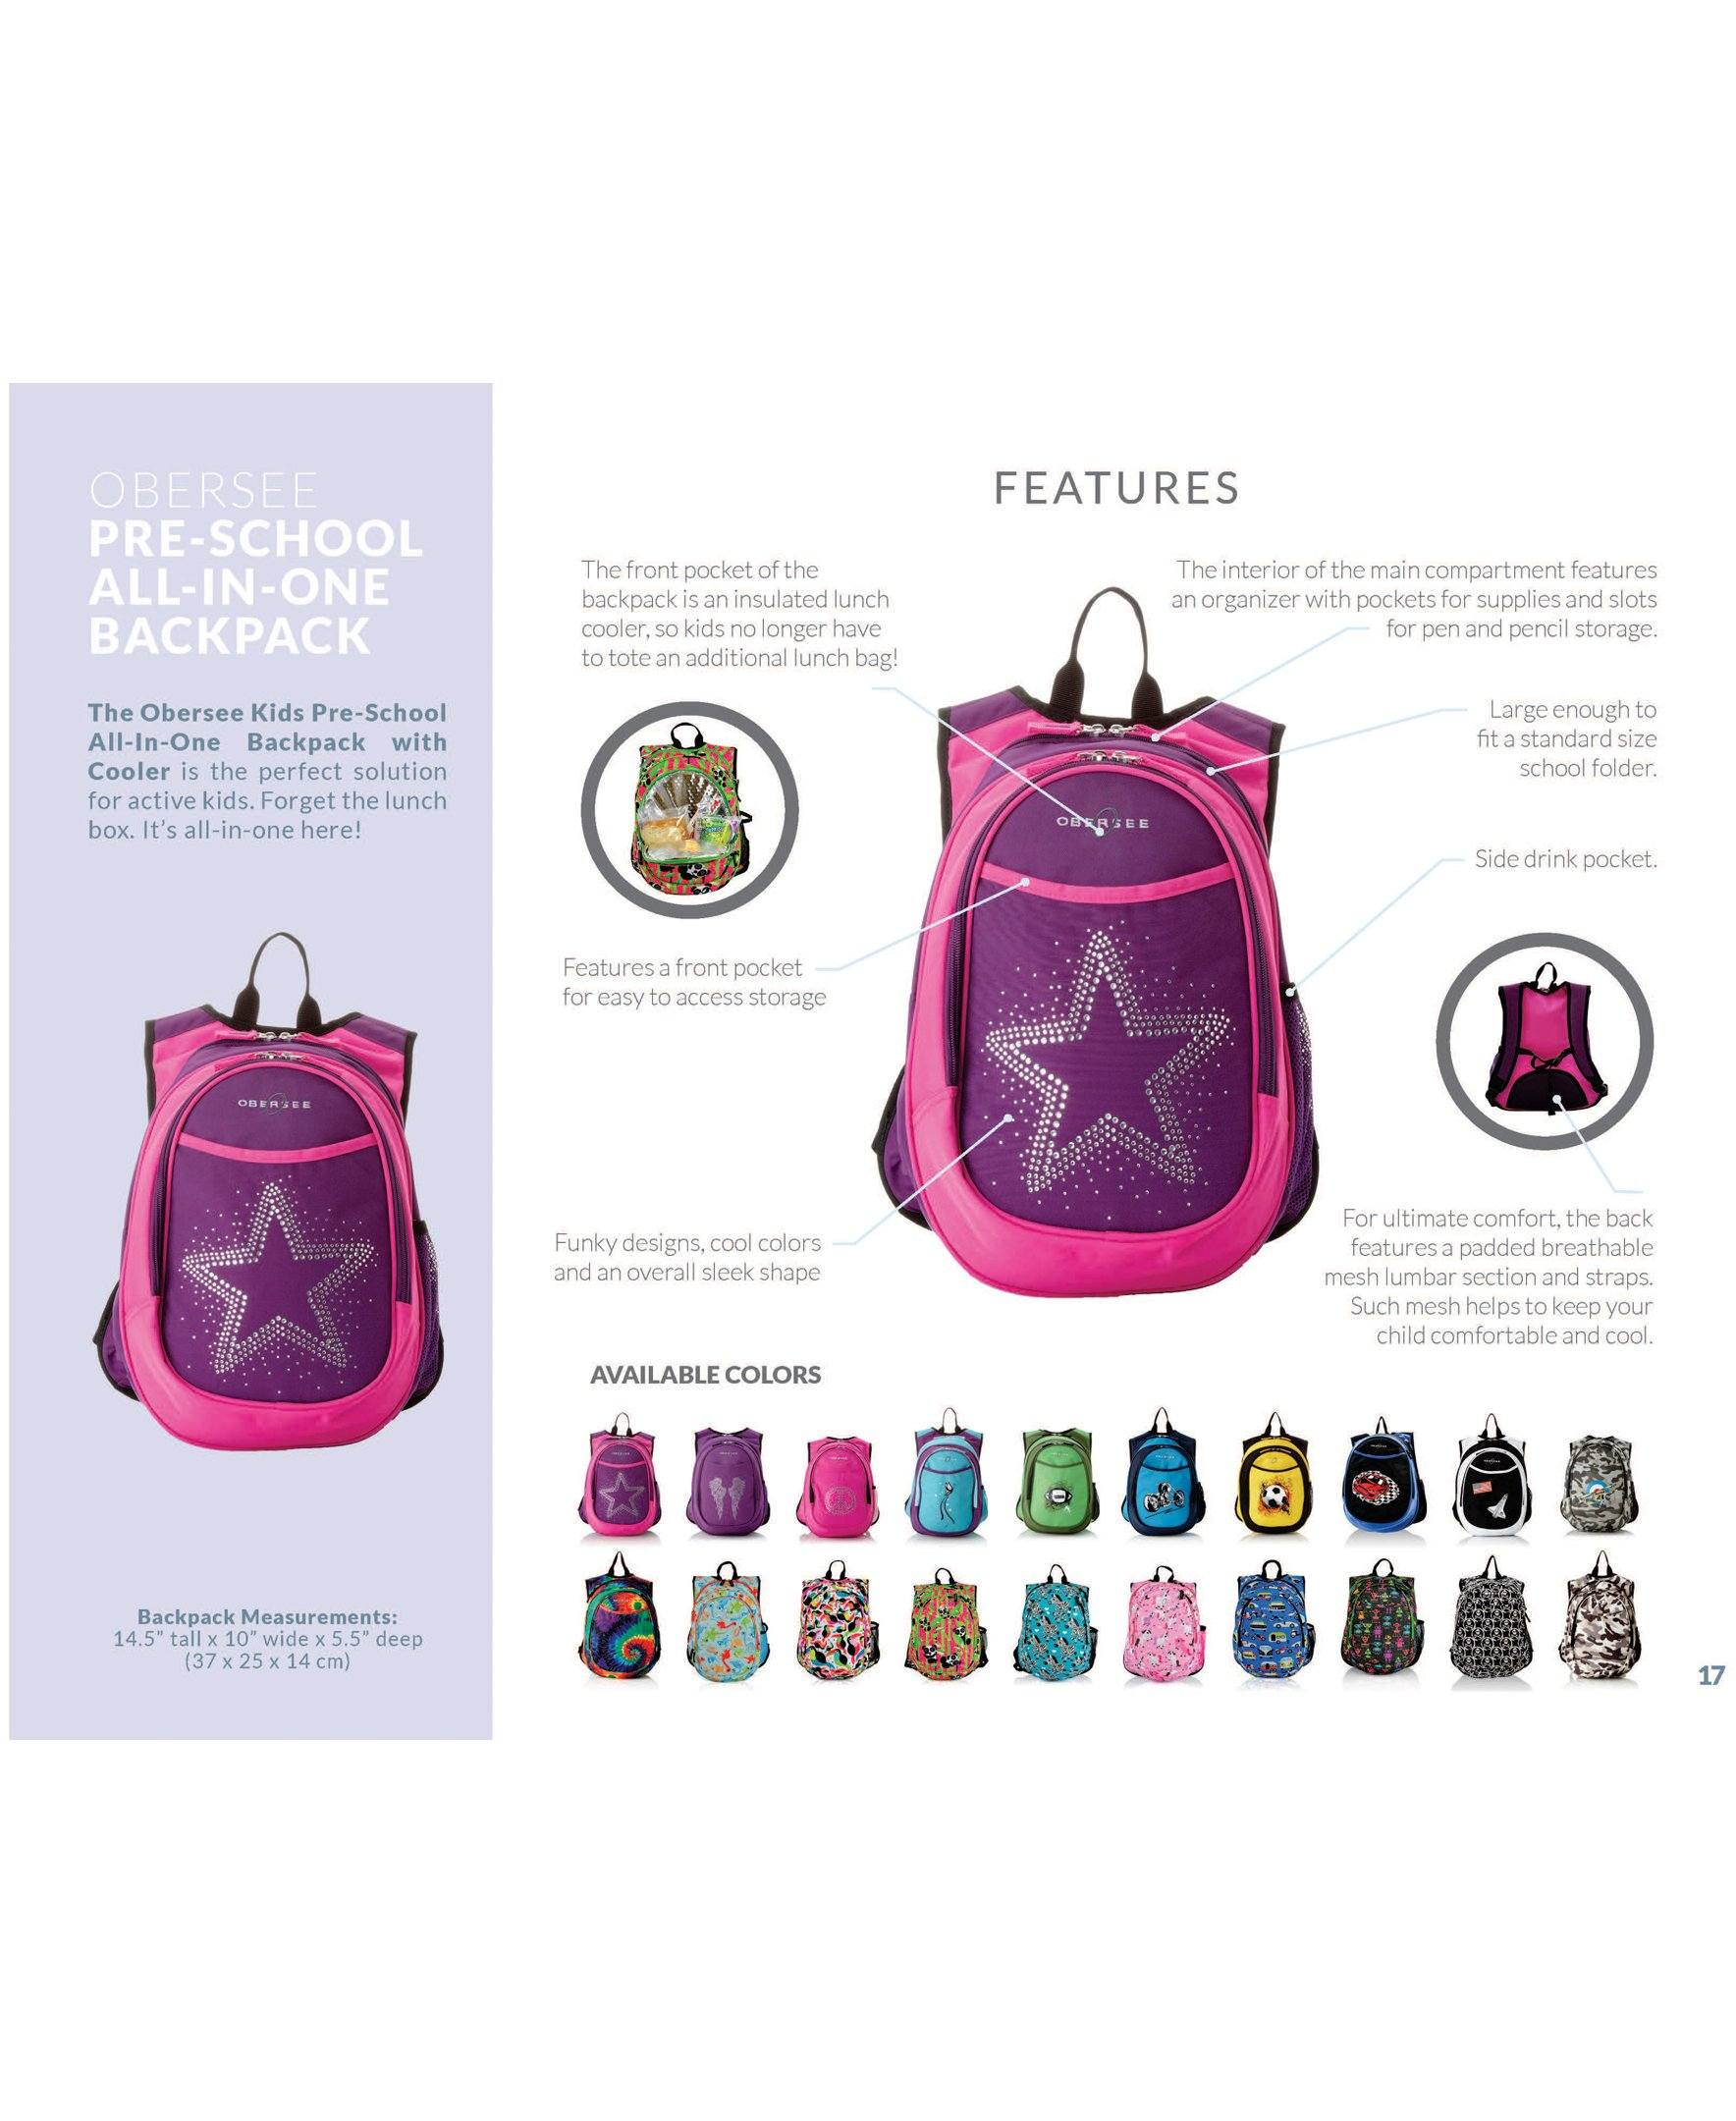 O3KCBP004 Obersee Mini Preschool All-in-One Backpack for Toddlers and Kids with integrated Insulated Cooler | Butterfly - image 4 of 5